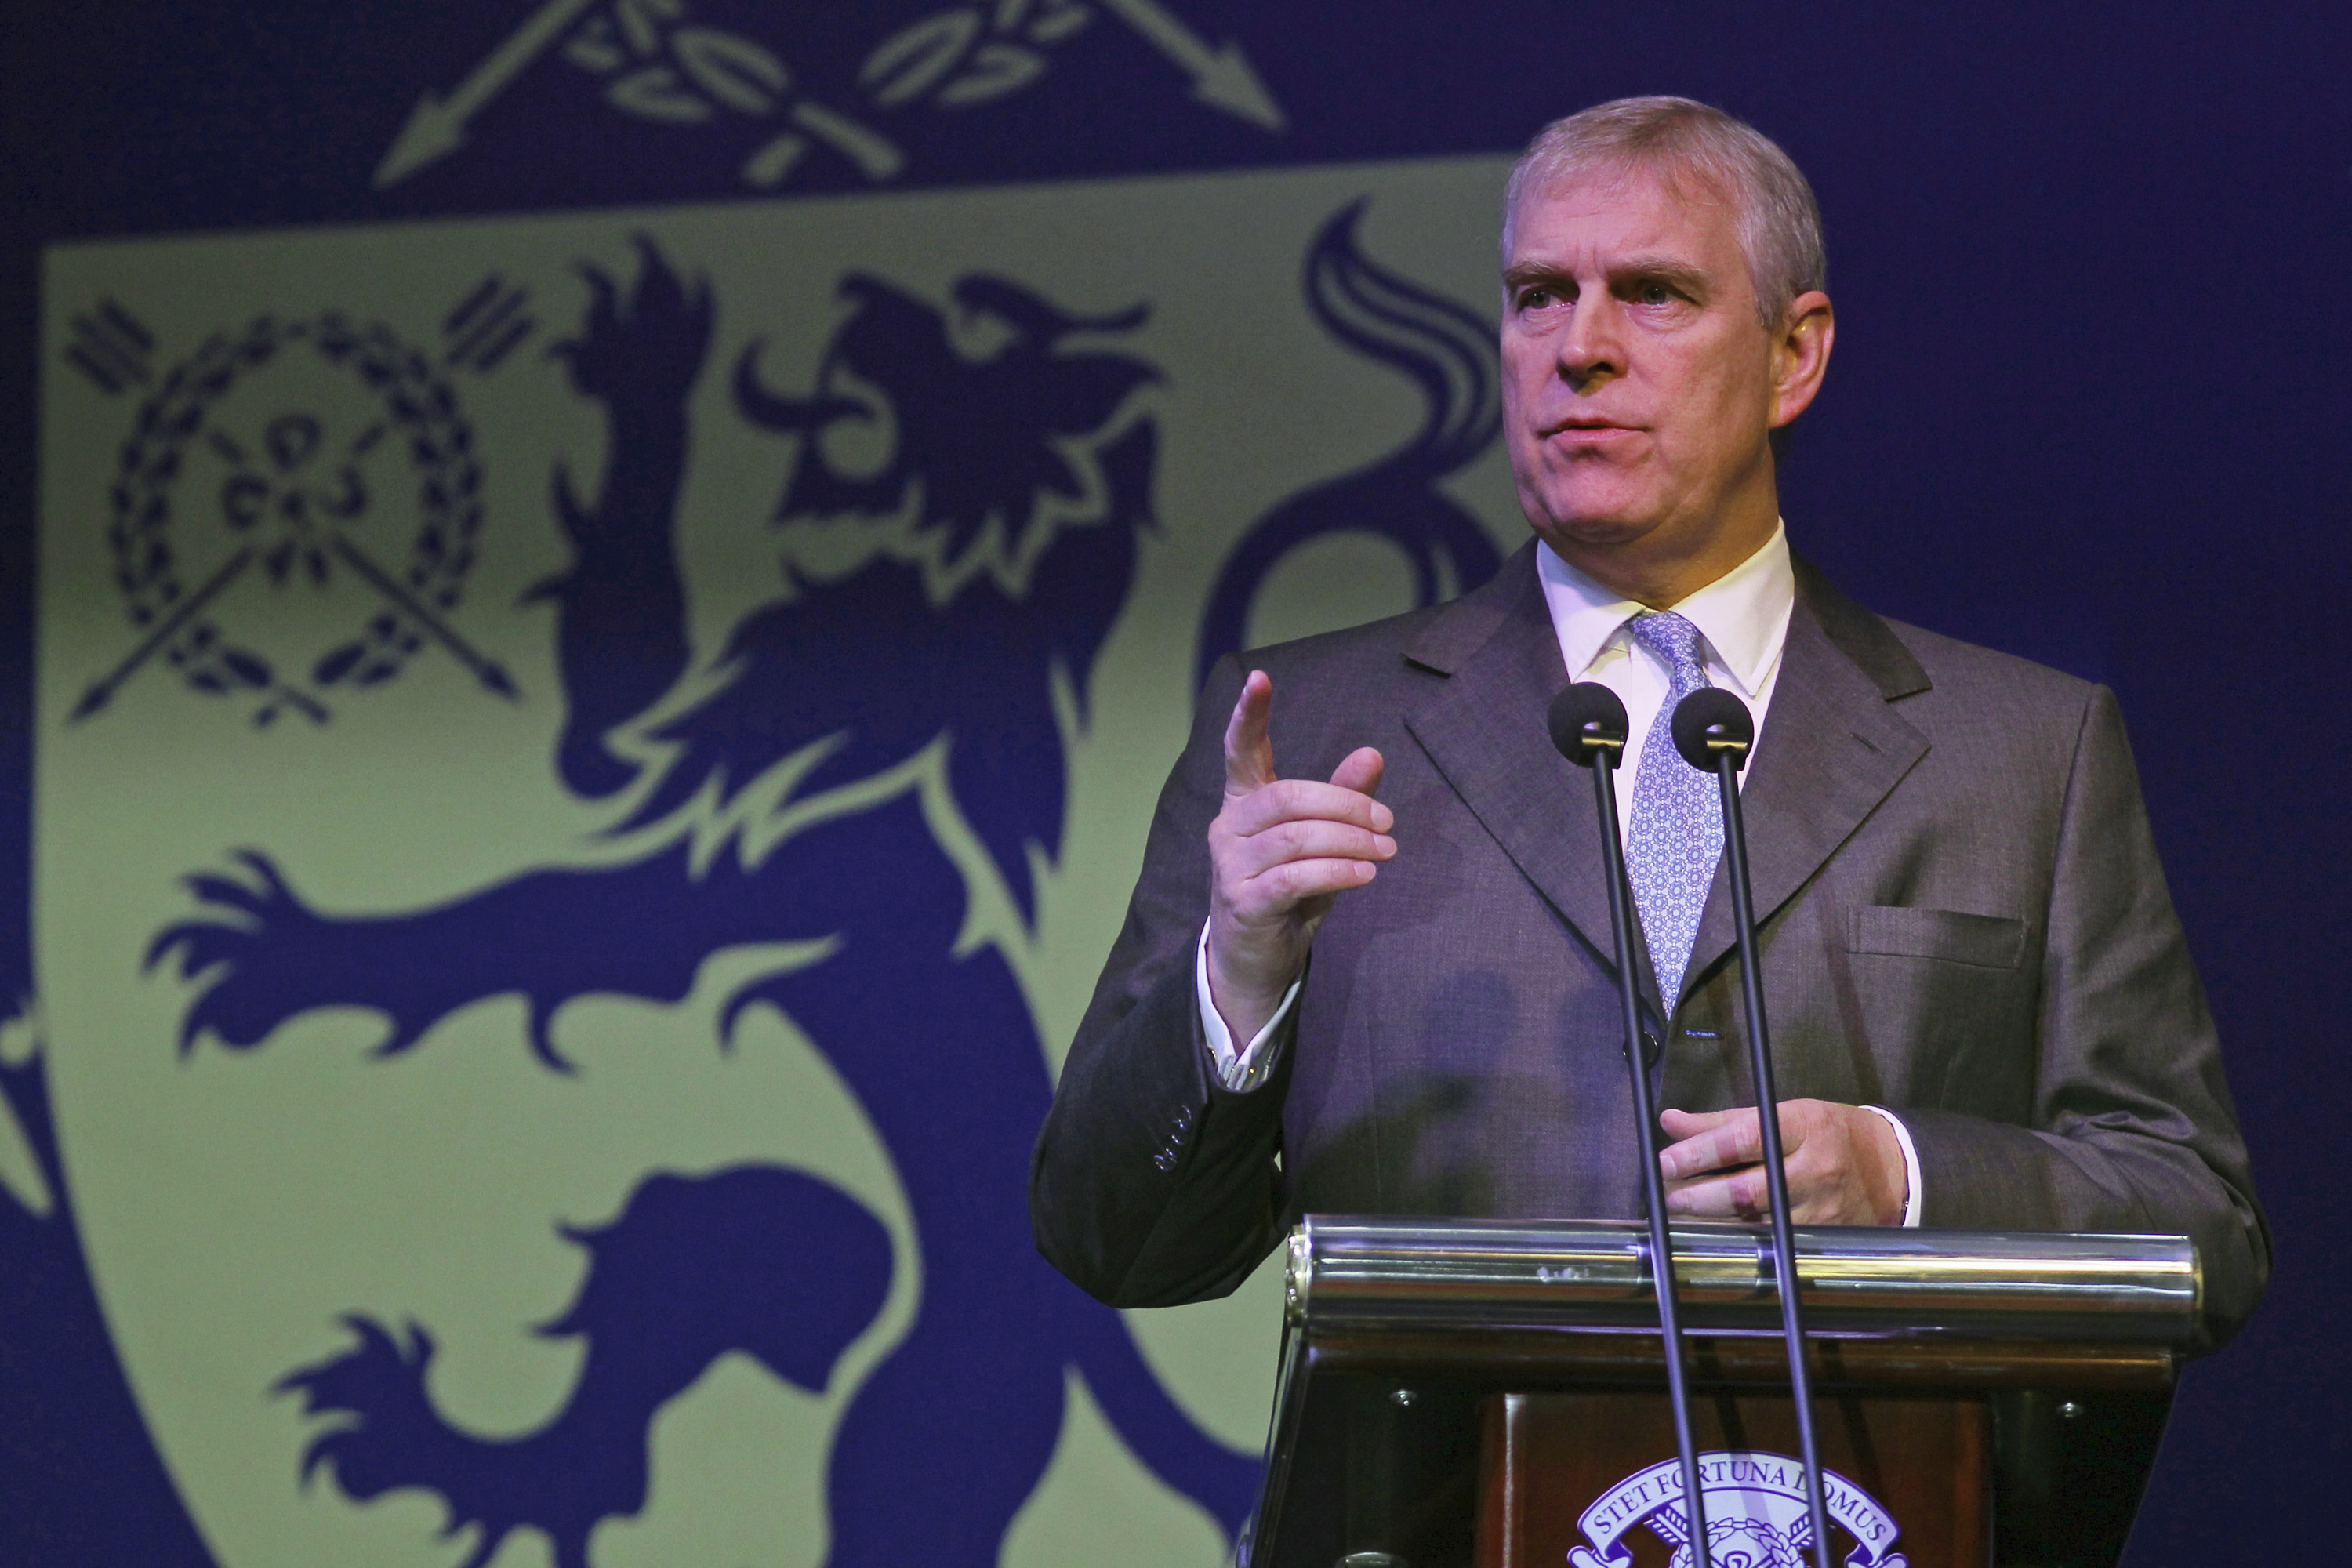 Britain's Prince Andrew speaks at the 10th anniversary of Harrow International School Beijing on Oct. 24, 2014. (China Daily/Reuters)